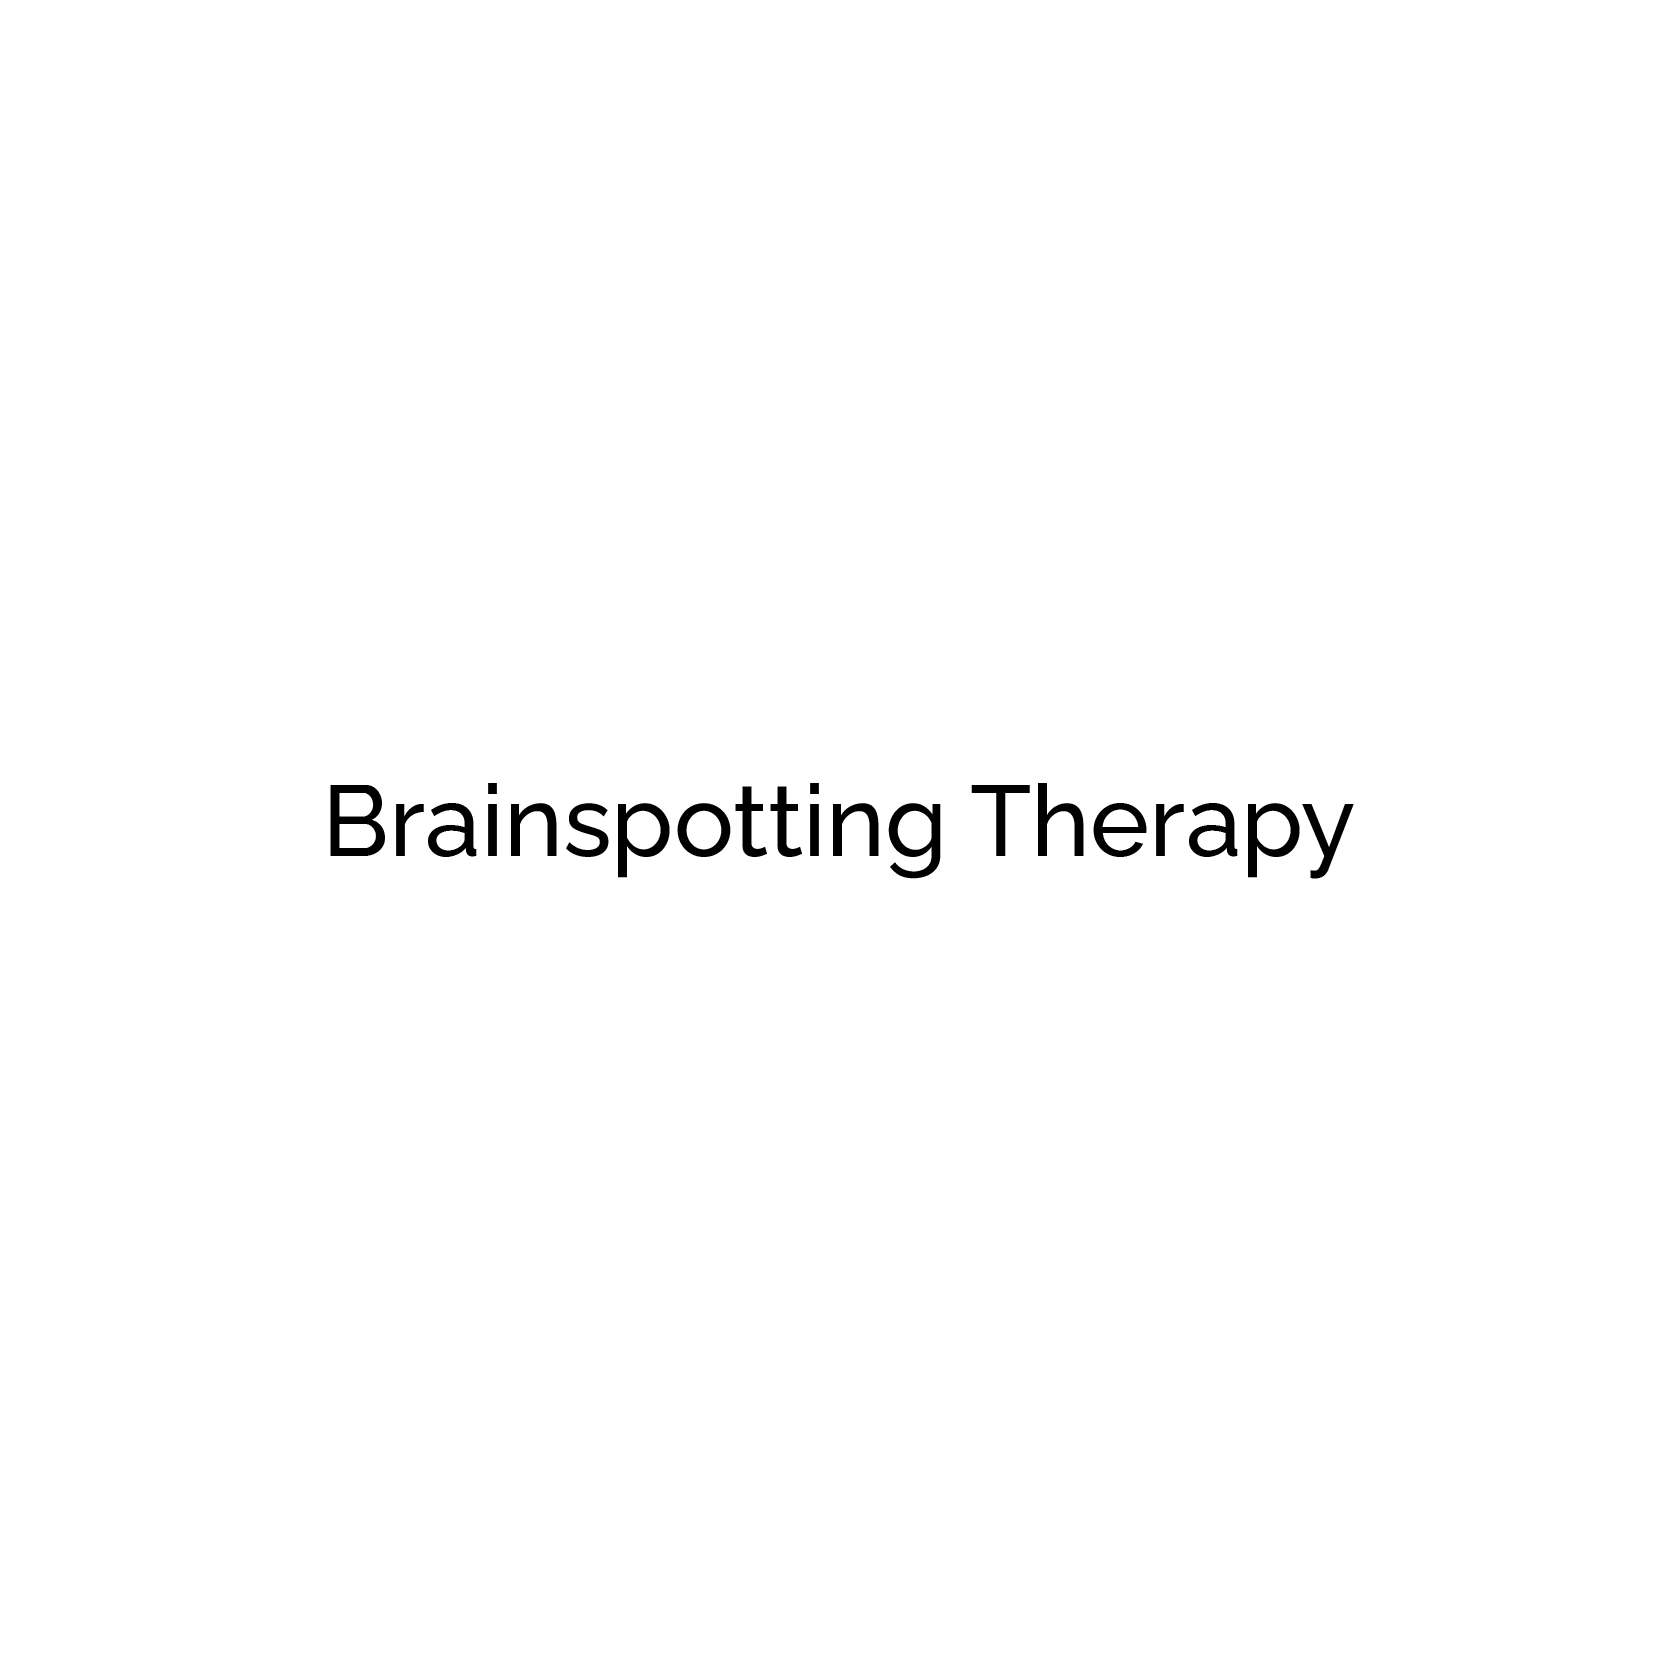 Brainspotting Therapy